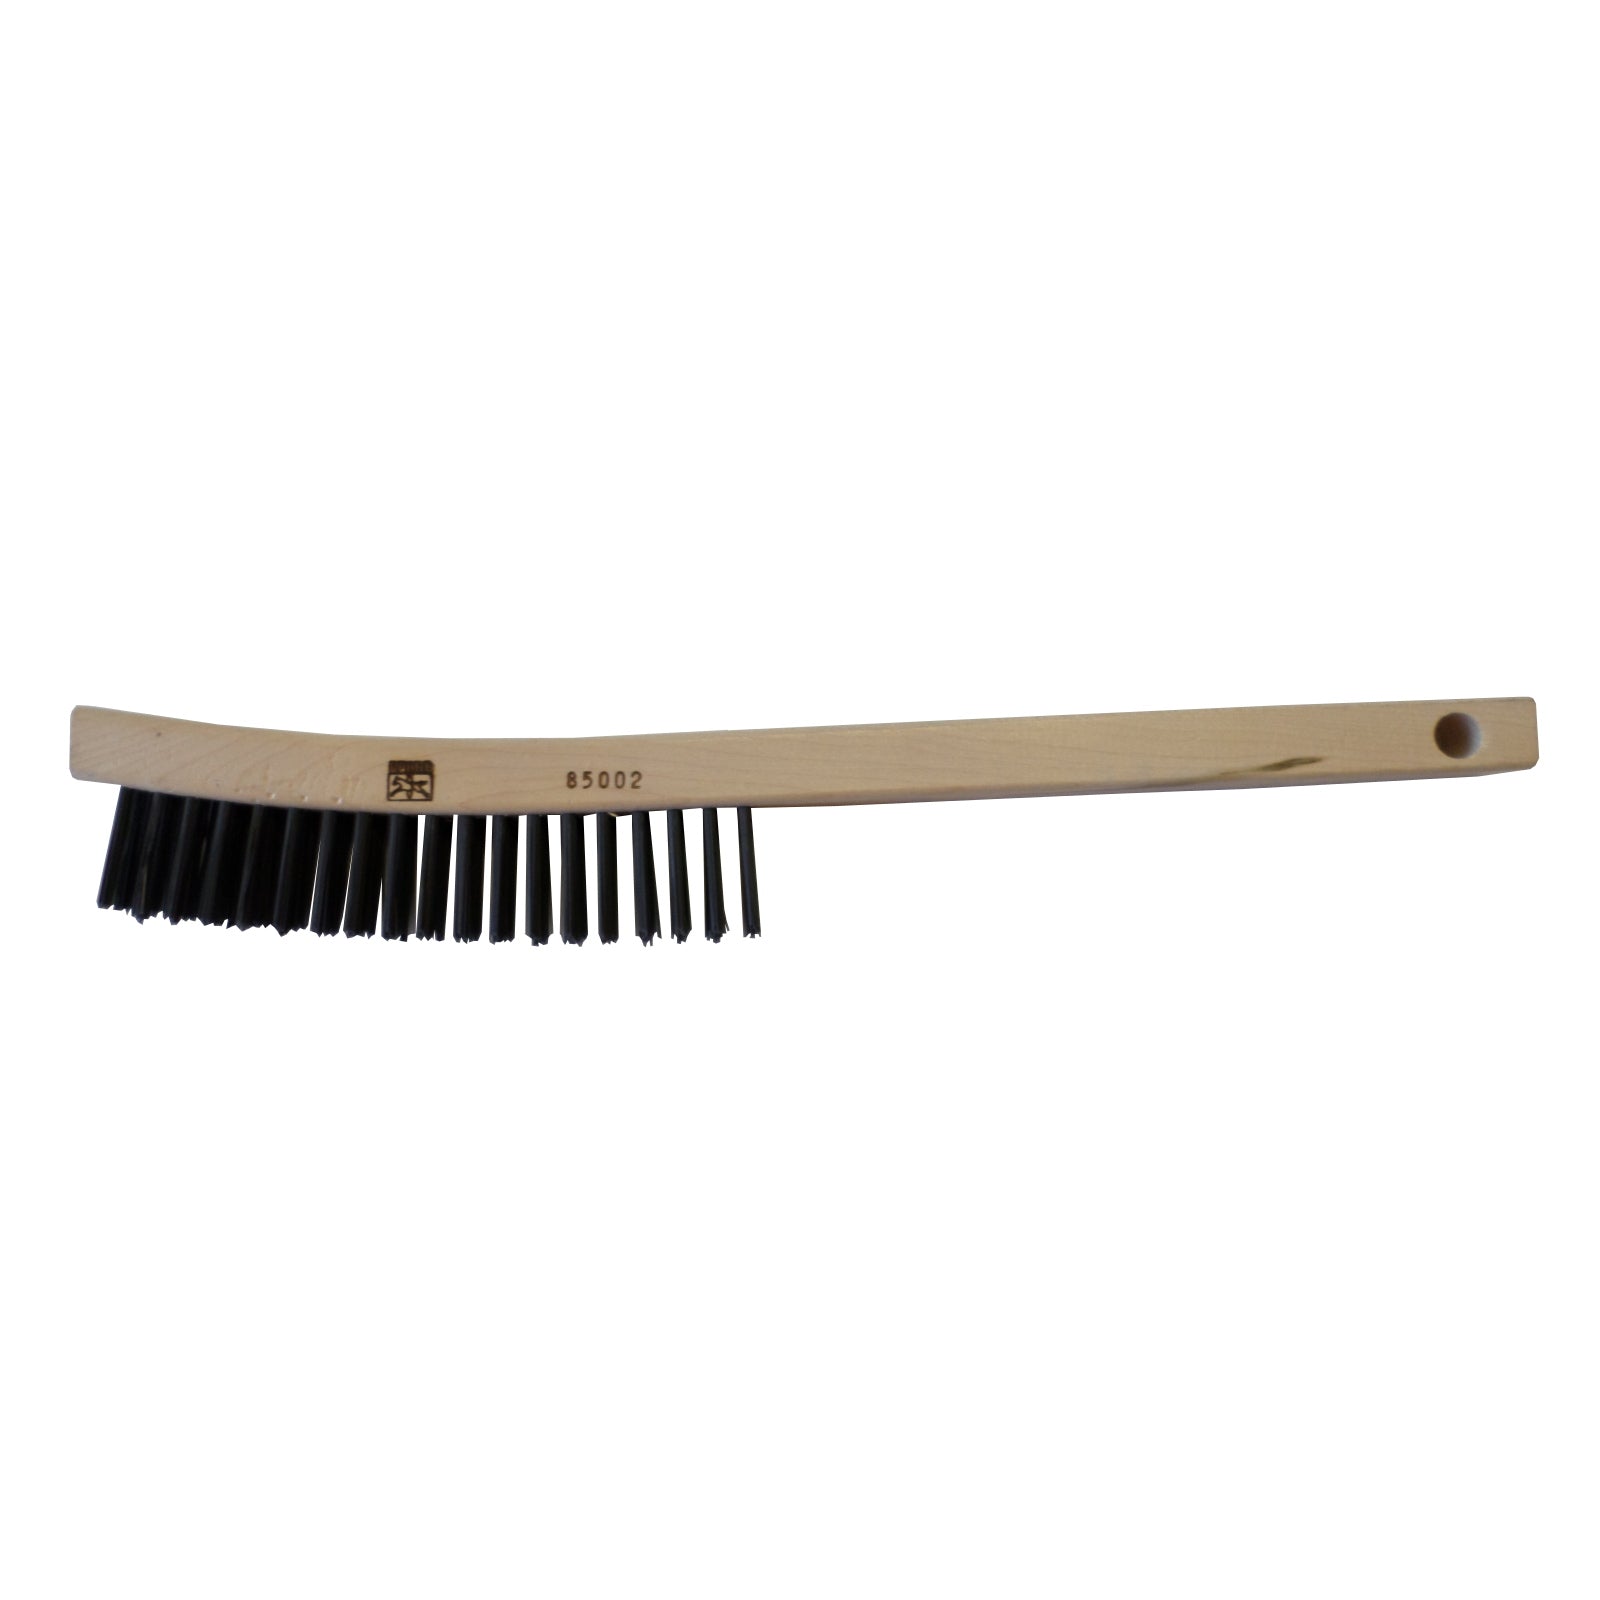 BW-103 Curved Handle Carbon Steel Brush 13-3/4"X 15/16"